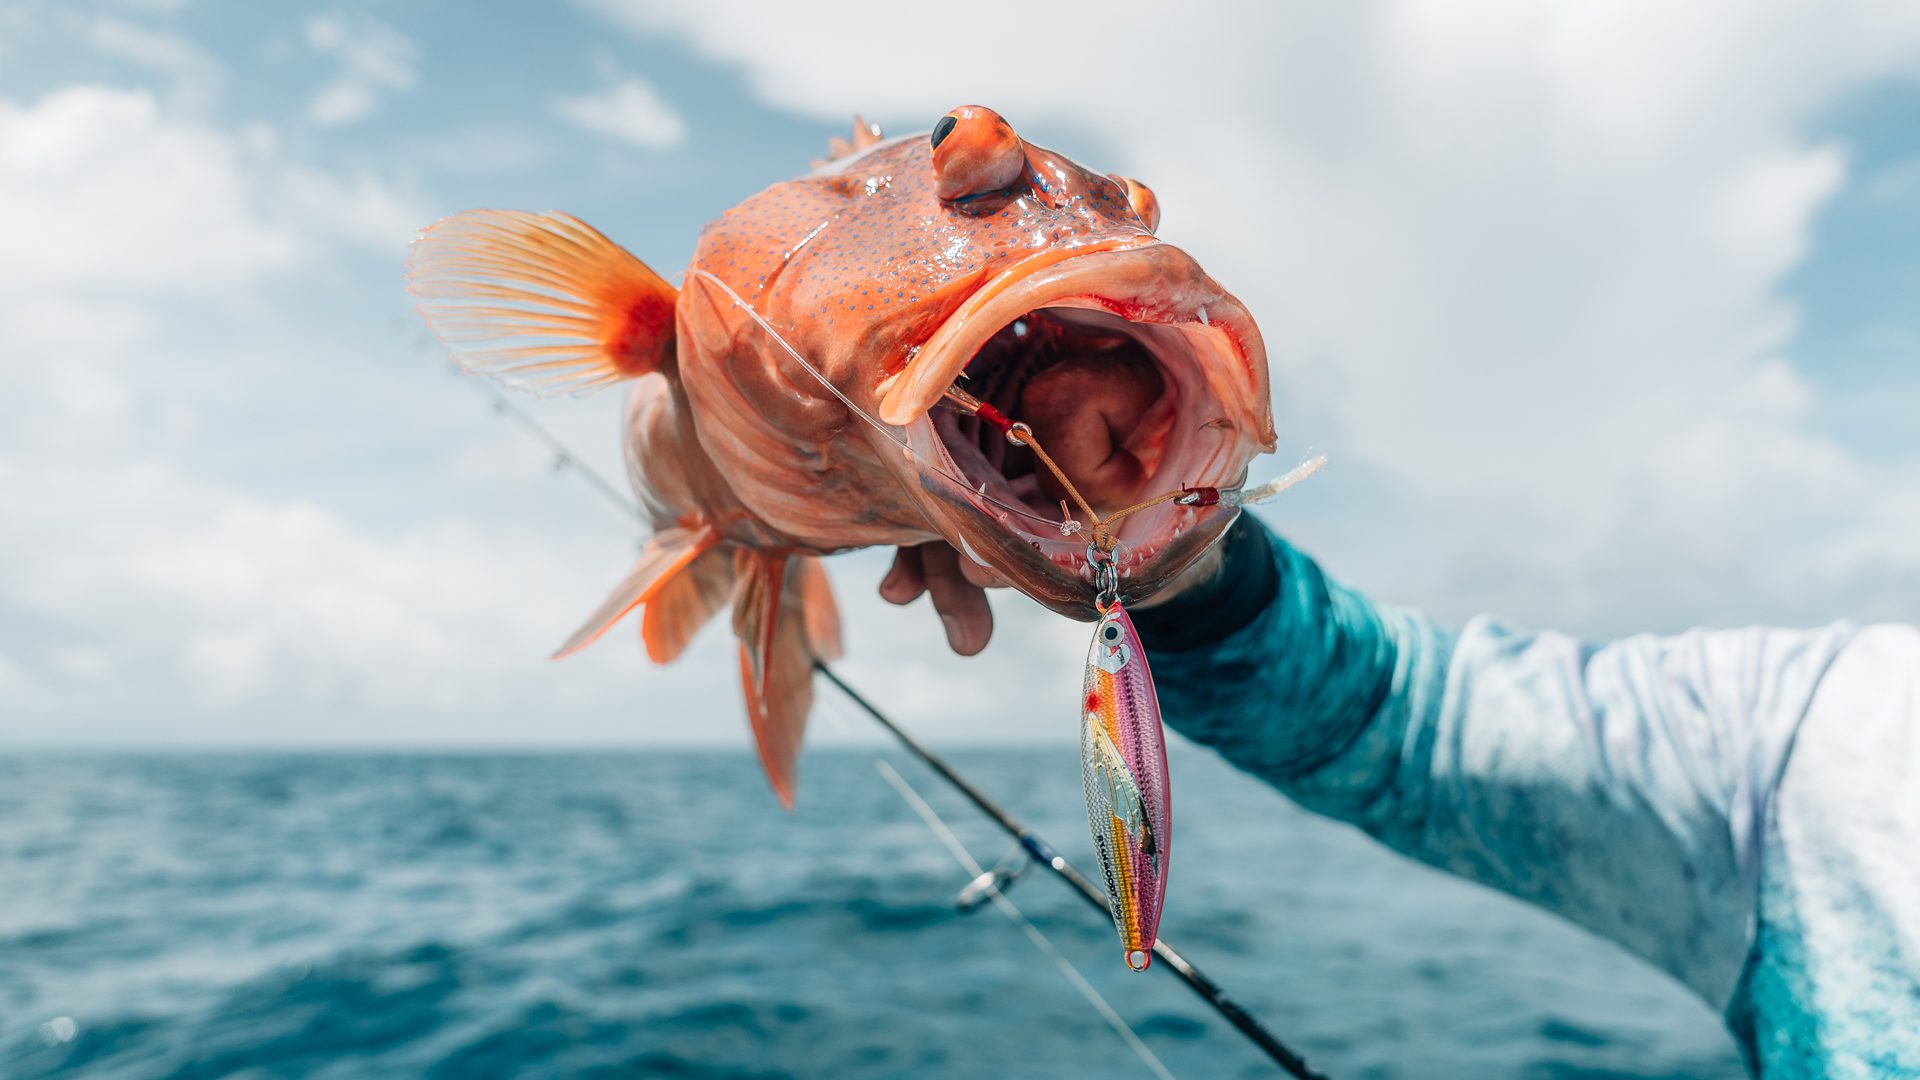 Slow pitch jigging results in this delicious coral trout